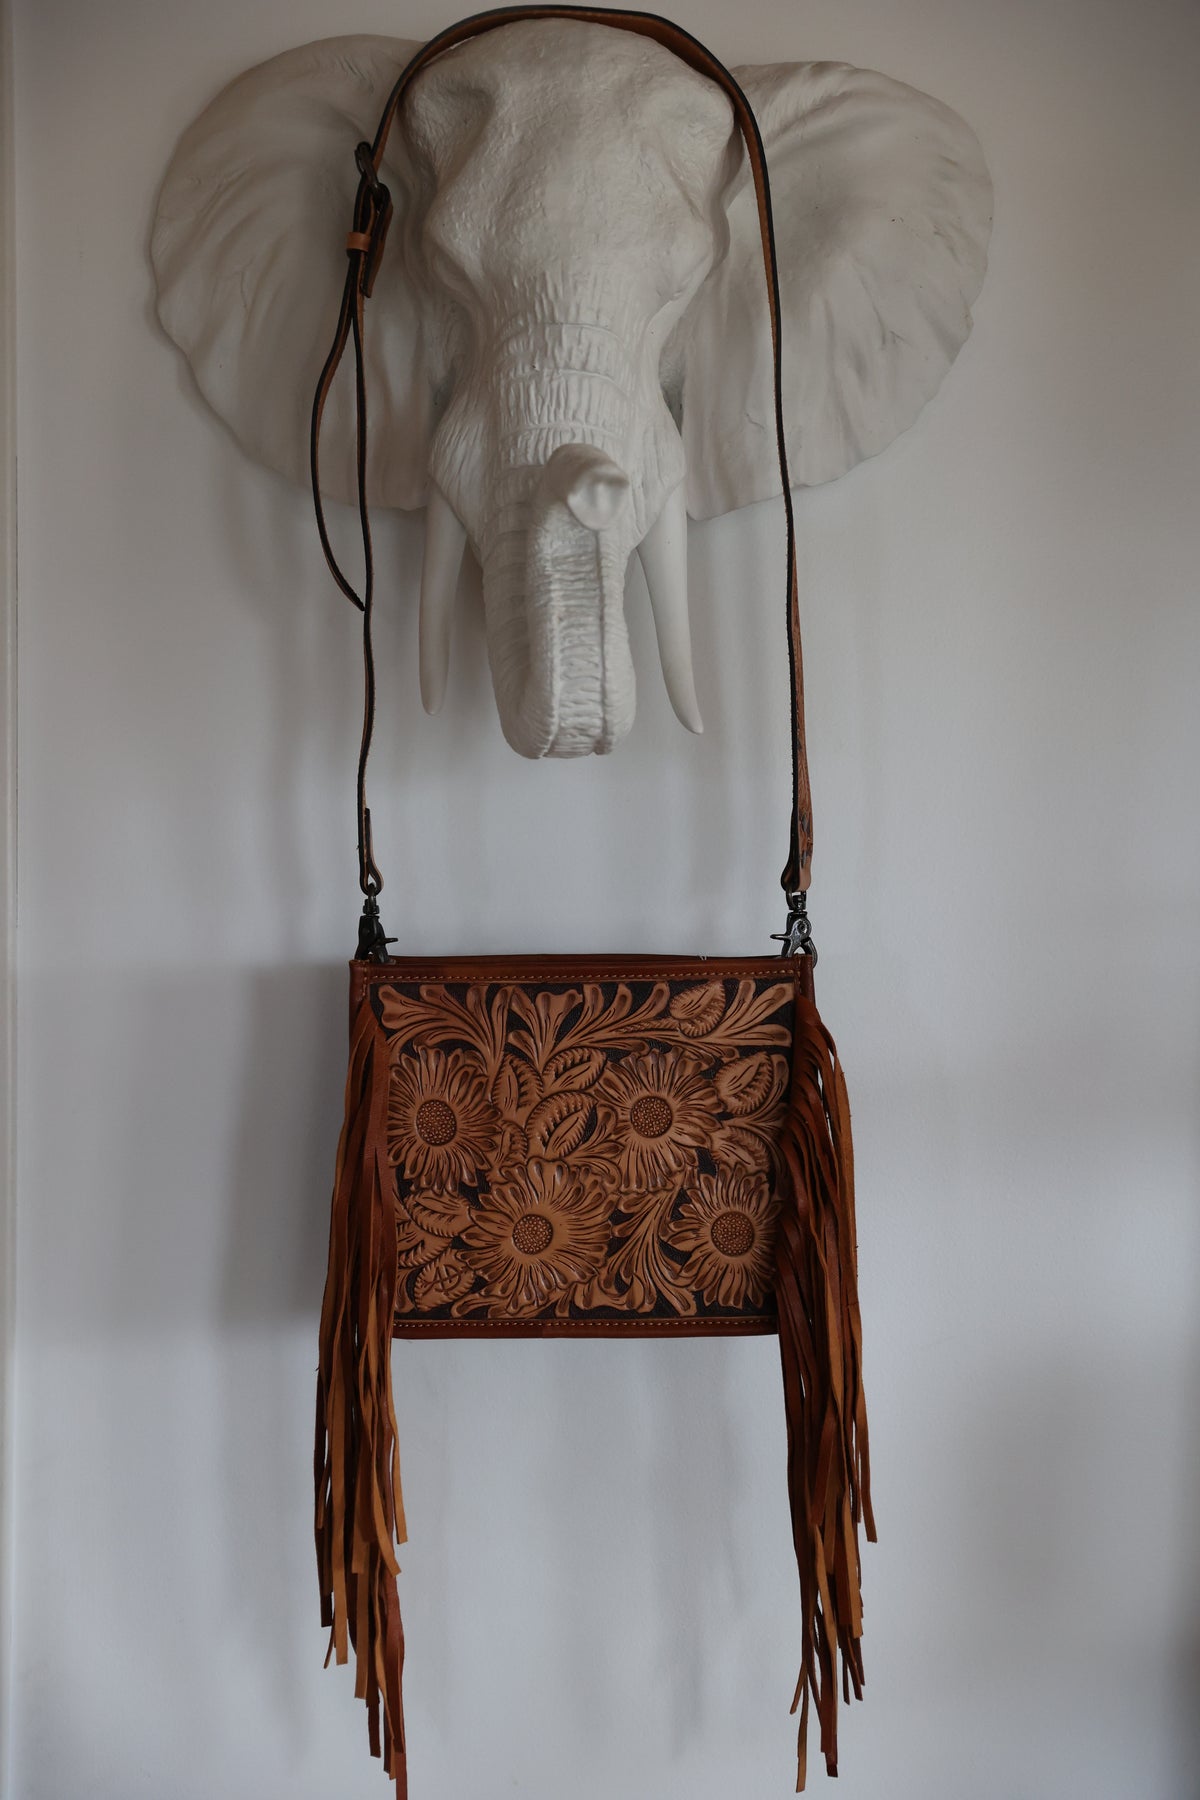 FULLY HAND TOOLED MESSENGER BAG - WITH HAND TOOLED STRAP